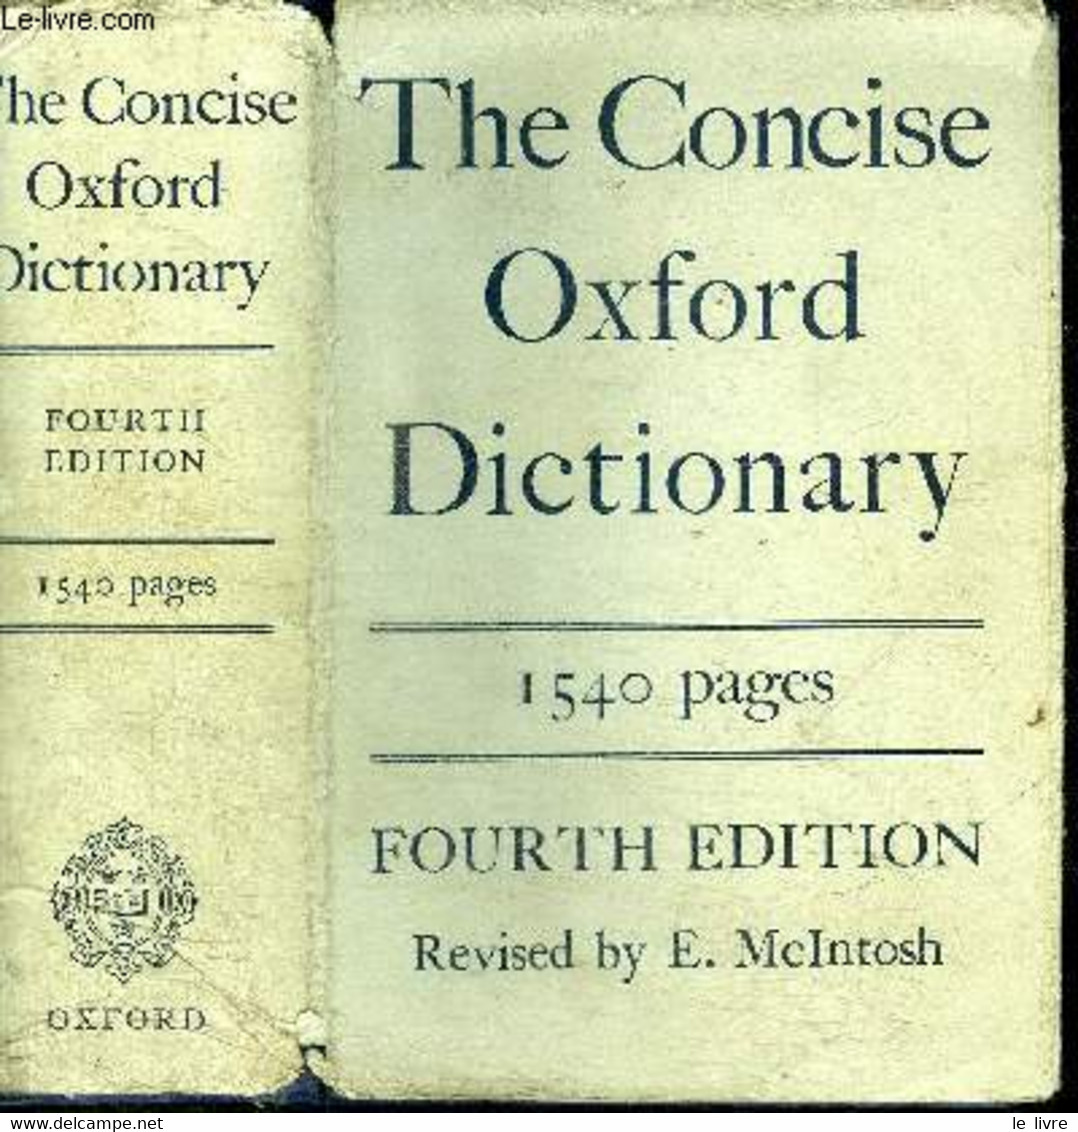 THE CONCISE OXFORD DICTIONARY OF CURRENT ENGLISH - FOWLER H.W. / FOWLER F.G. - 1951 - Dictionaries, Thesauri